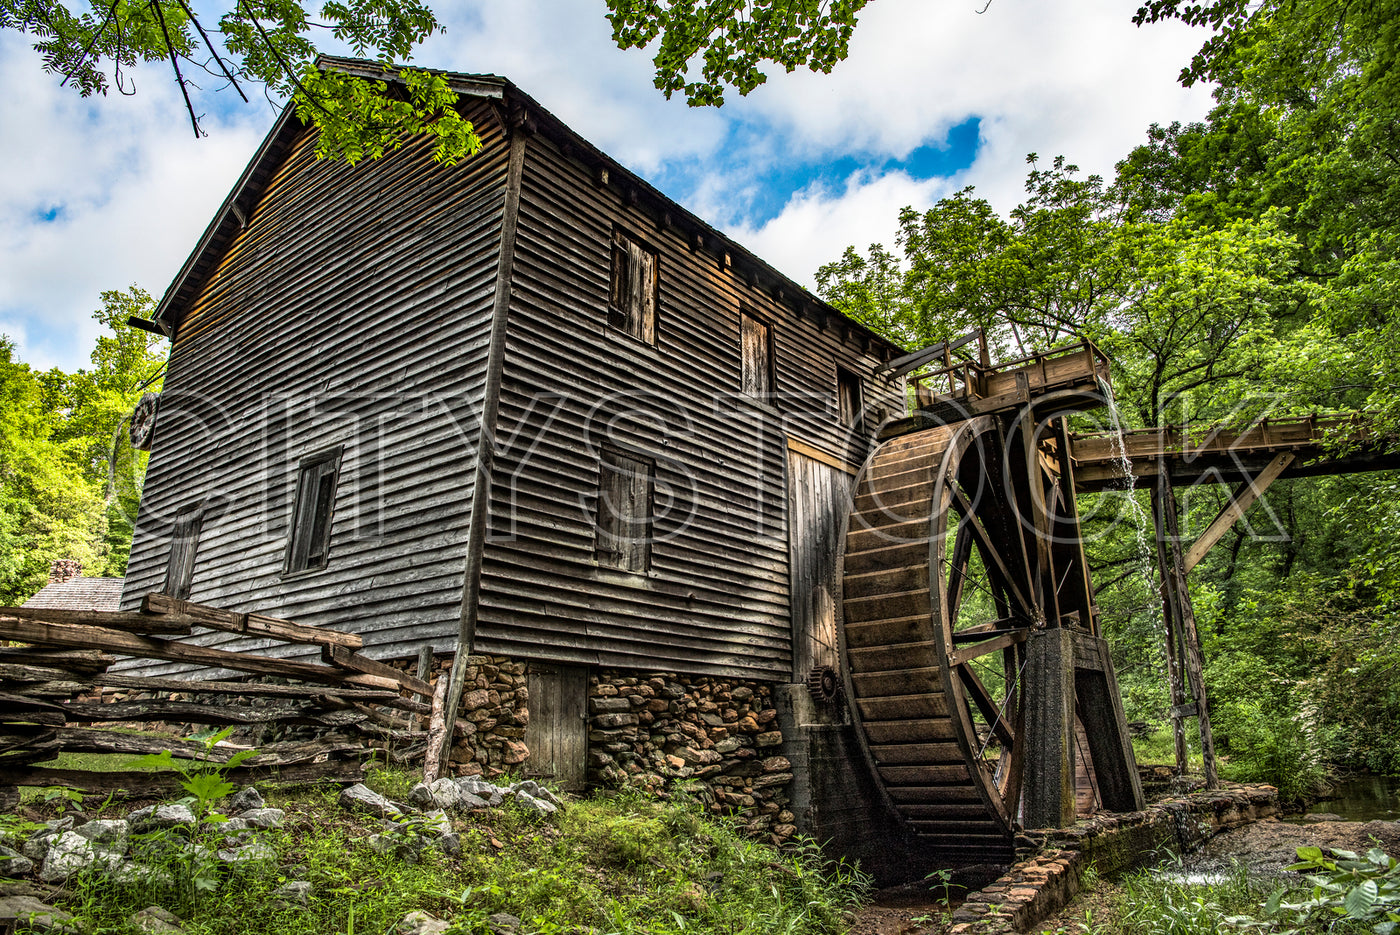 Historic wooden watermill with water wheel in Pickens, SC